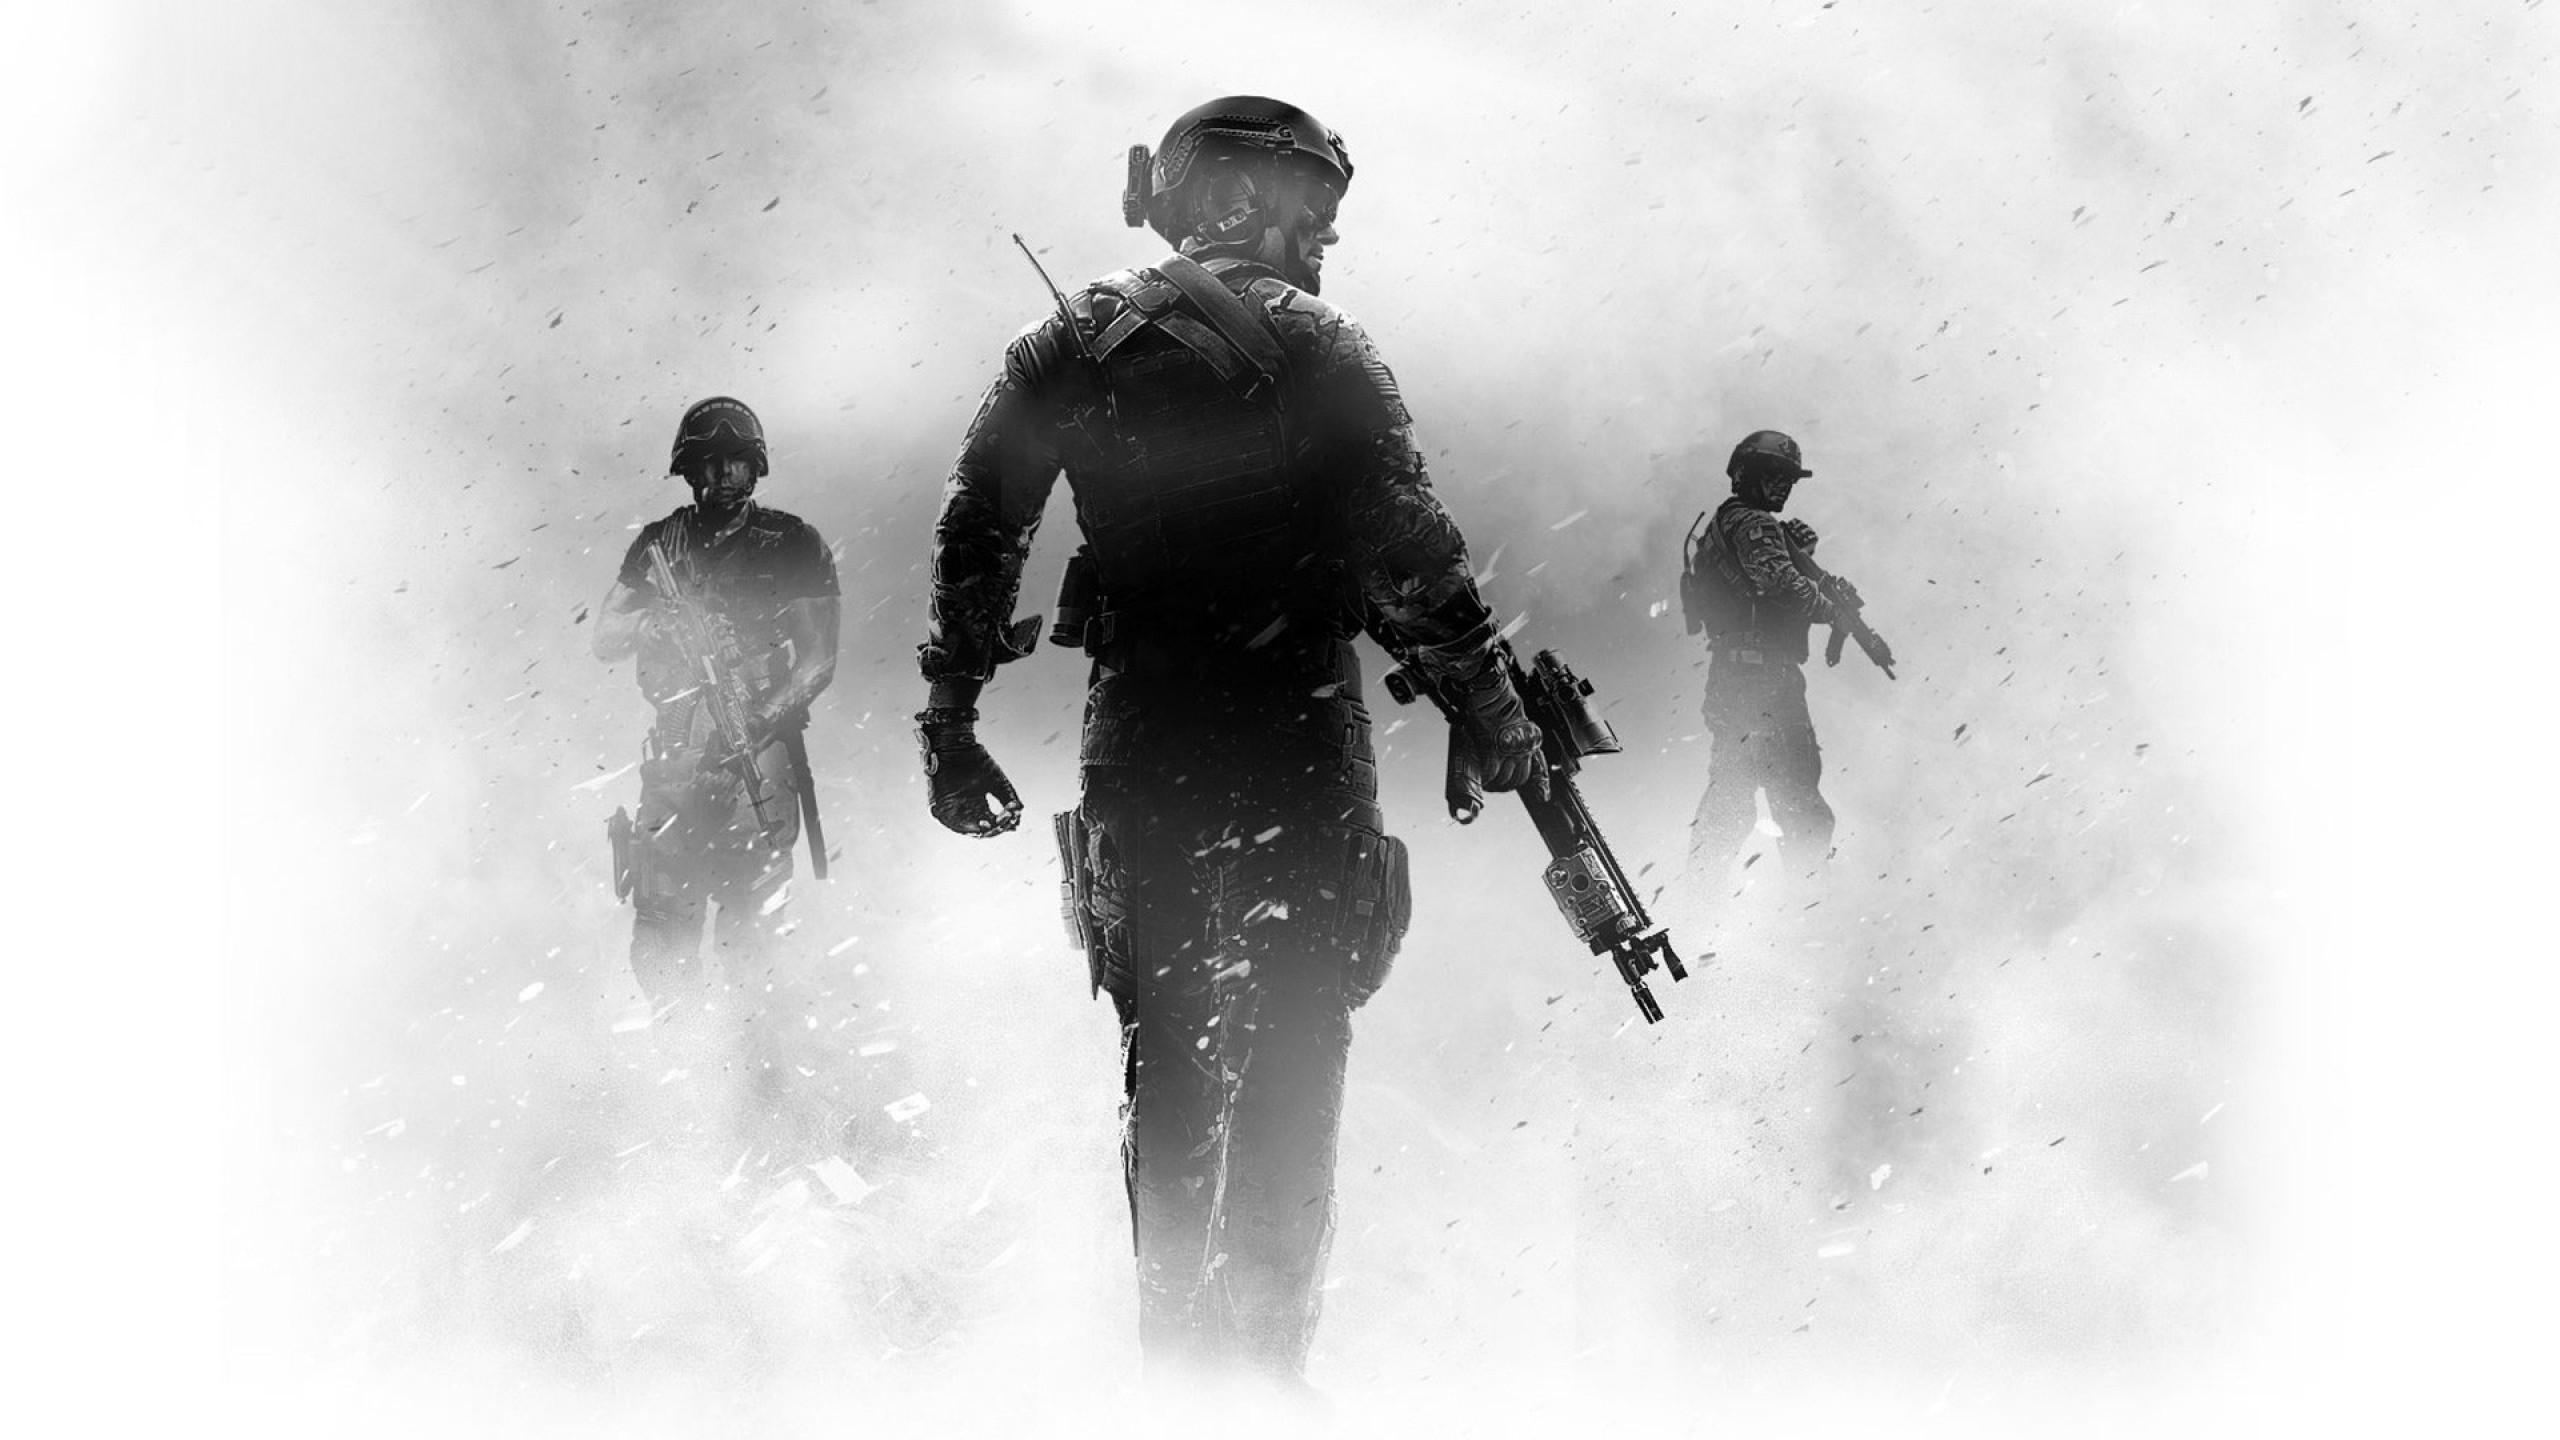 General 2560x1440 soldier Call of Duty video games video game art weapon military PC gaming men video game men